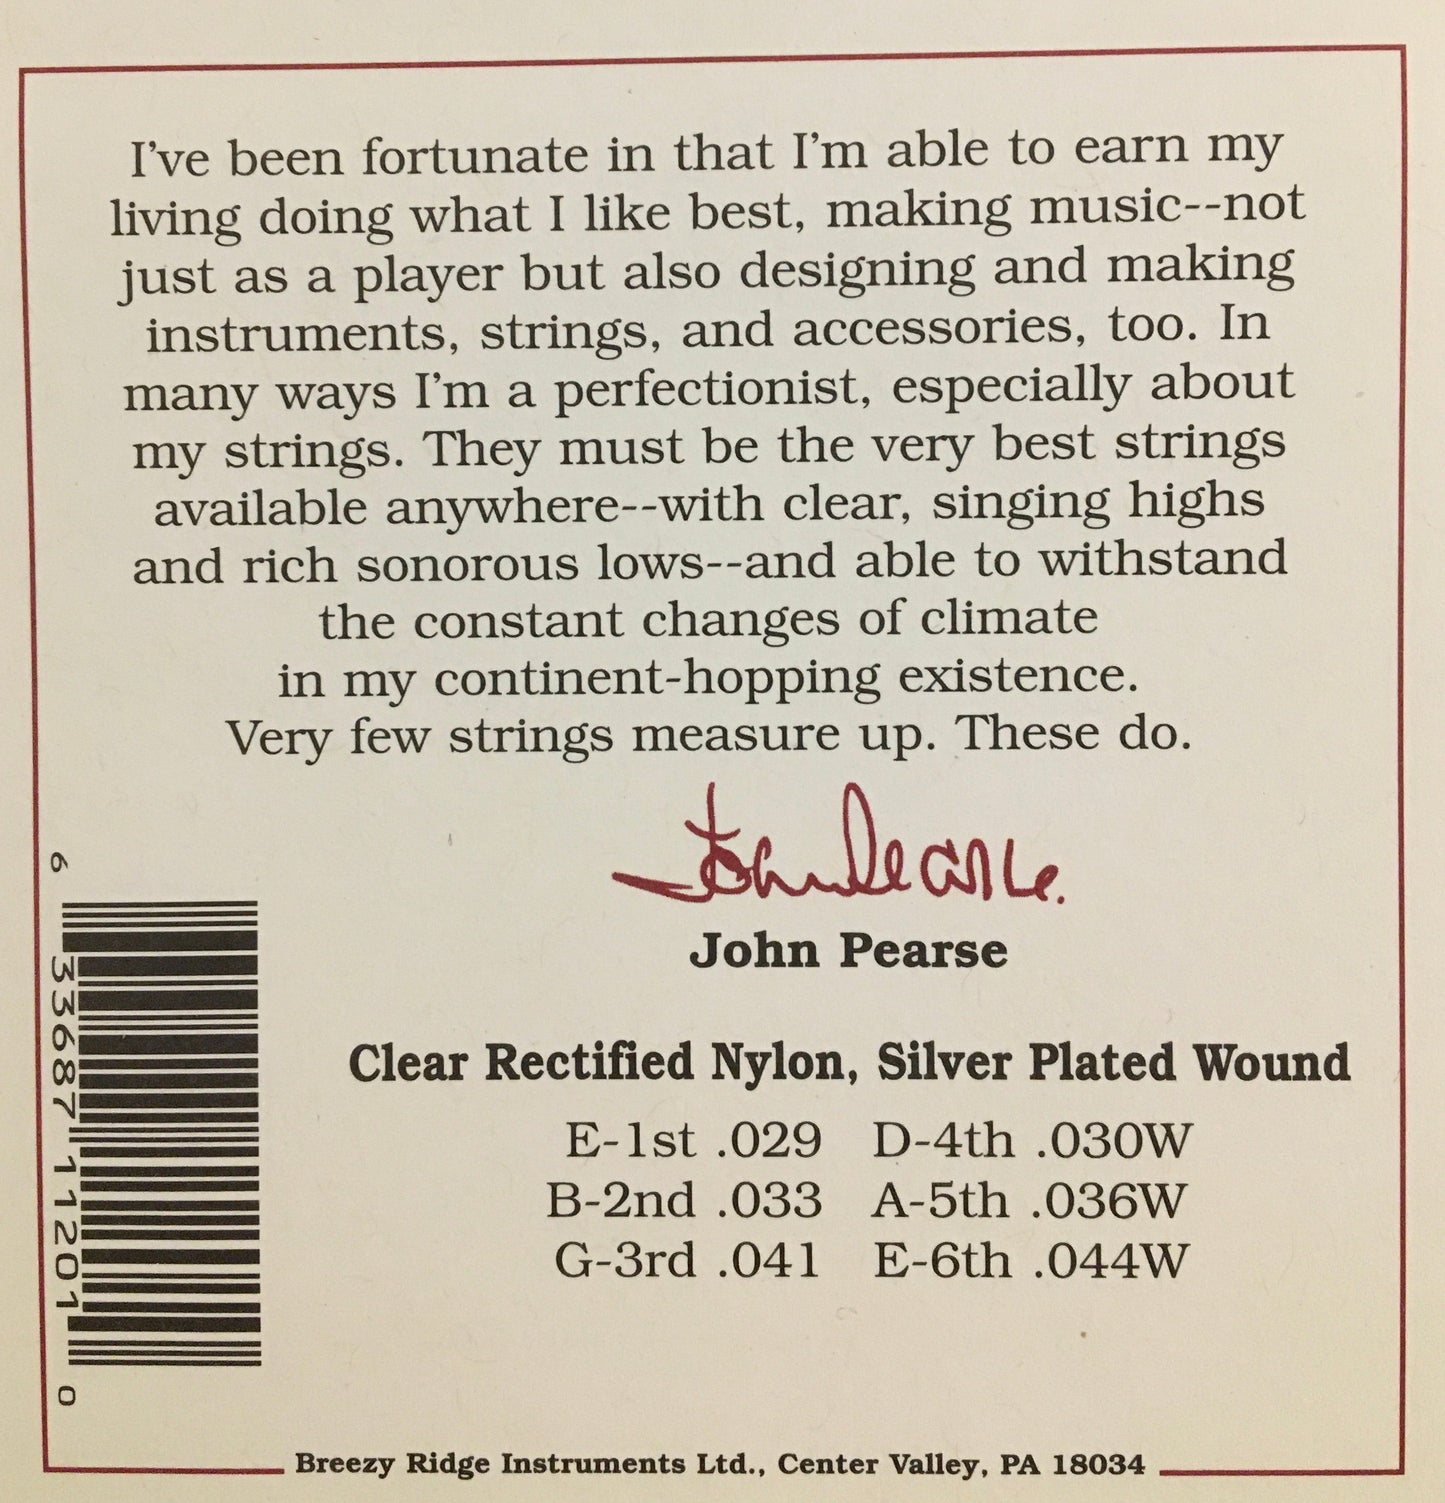 John Pearse 1200 Silver Plated Wound Classical Guitar String Set, Firm Tension Strings, Bows & More